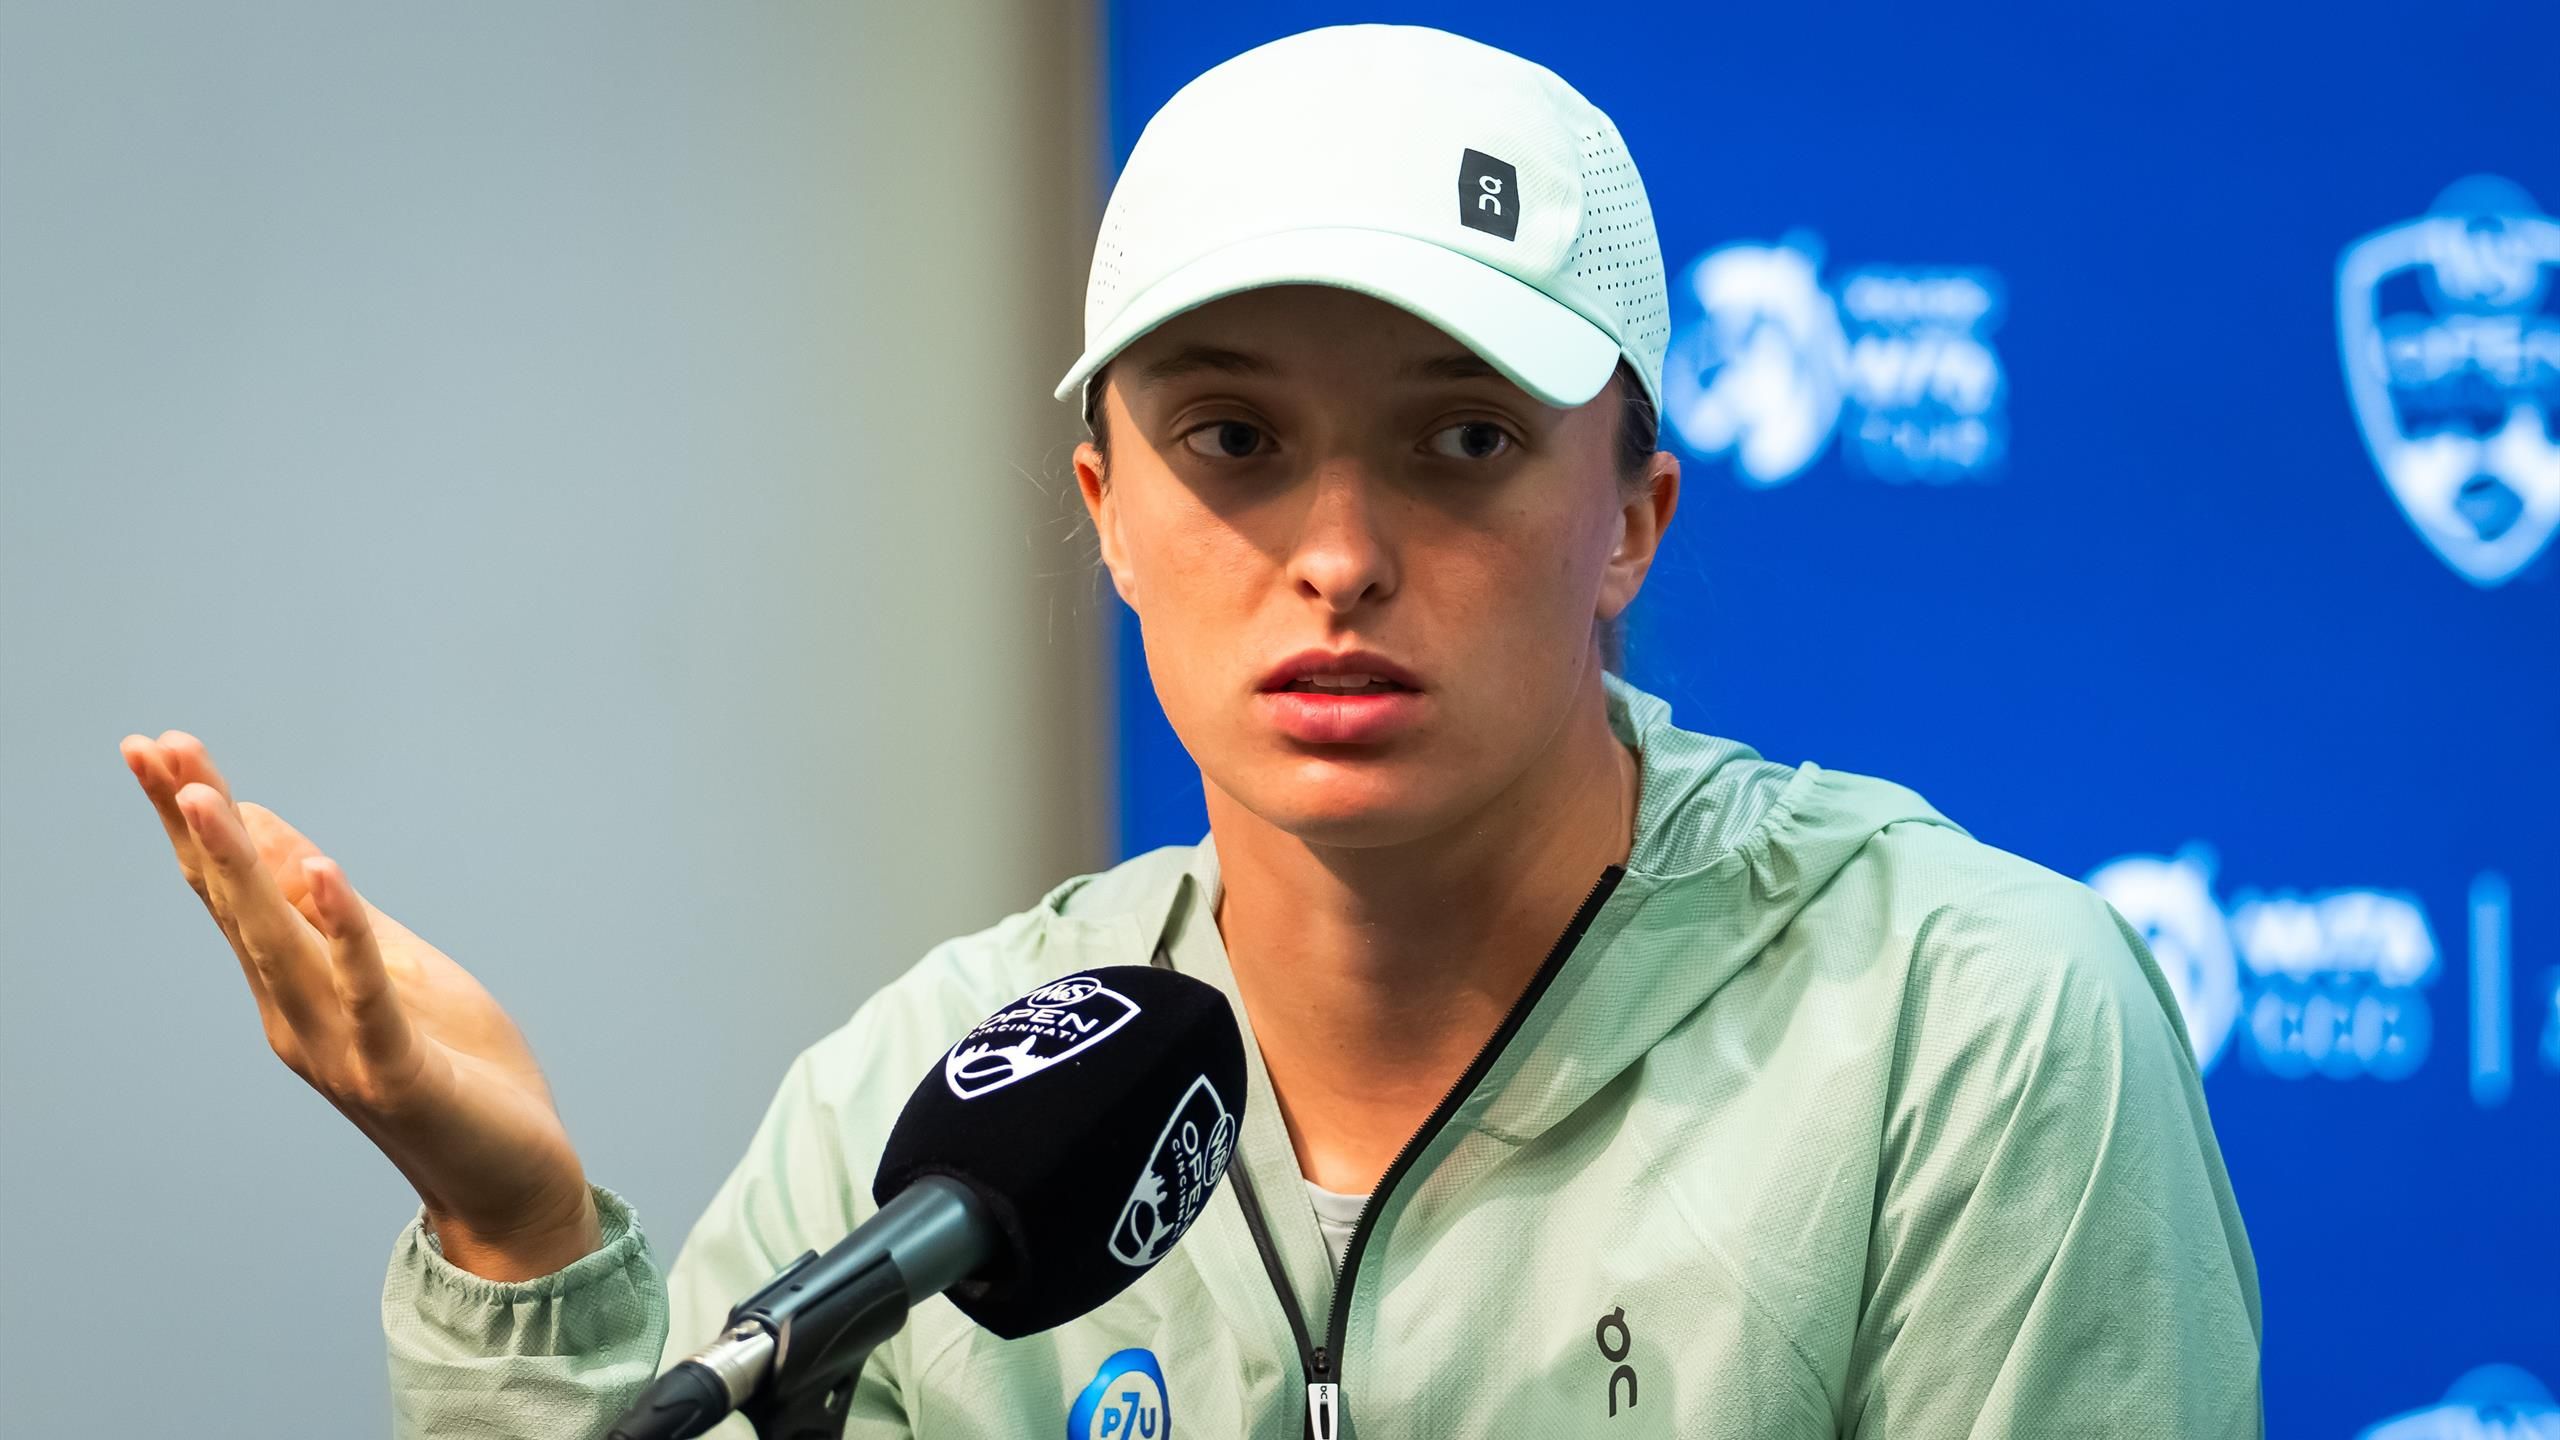 French Open champion Iga Swiatek calls for people to show more empathy after suffering online abuse